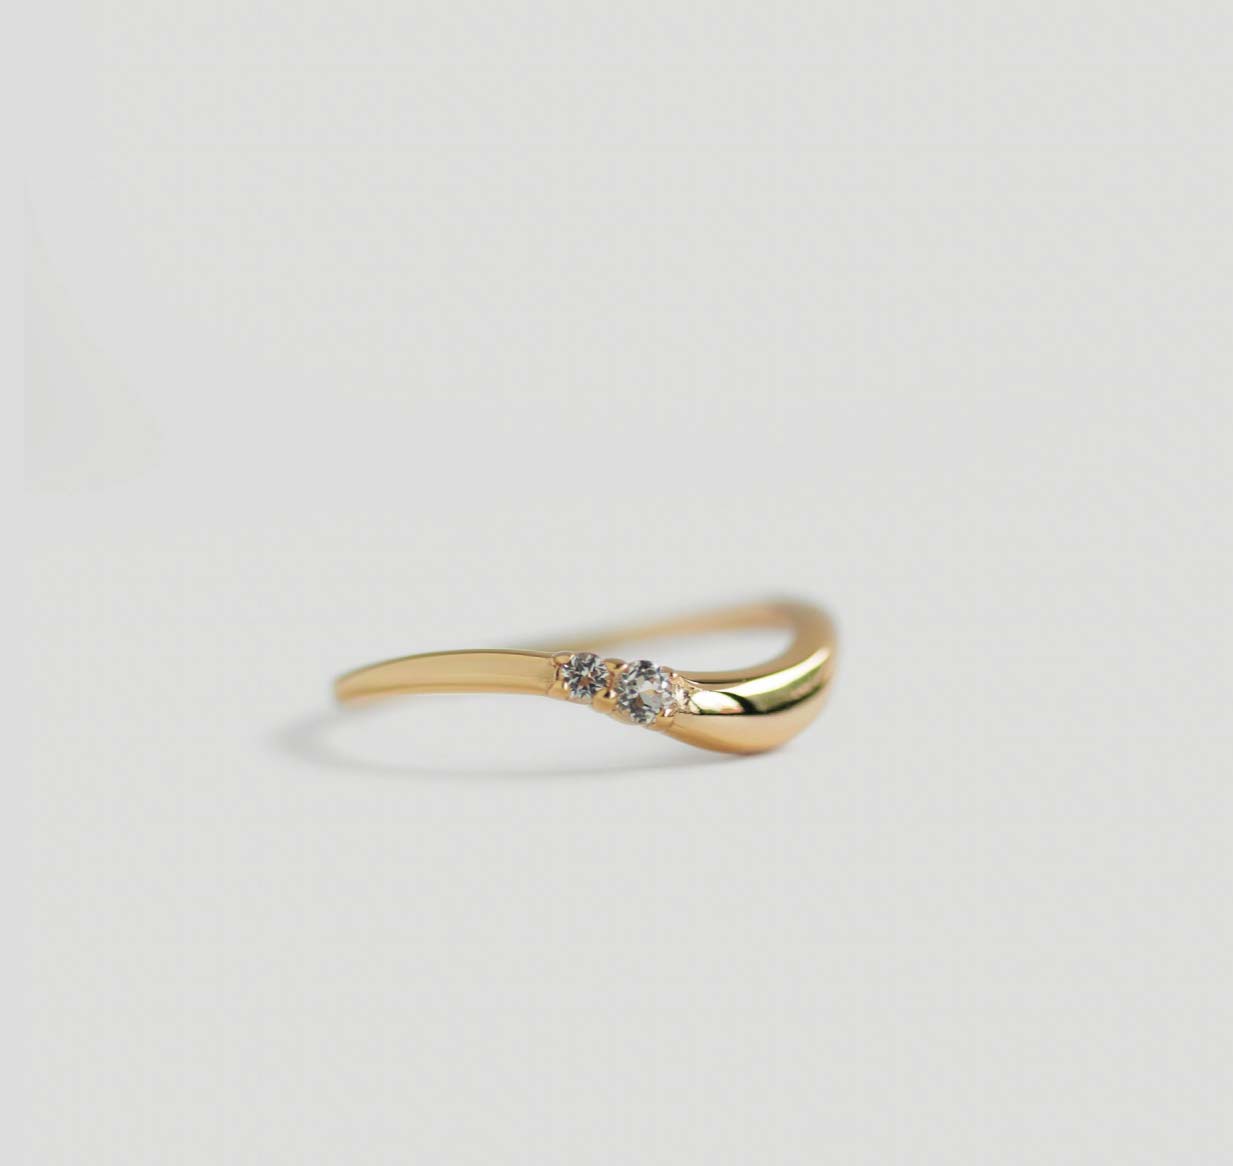 Paige Ring - White Topaz In Champagne Gold